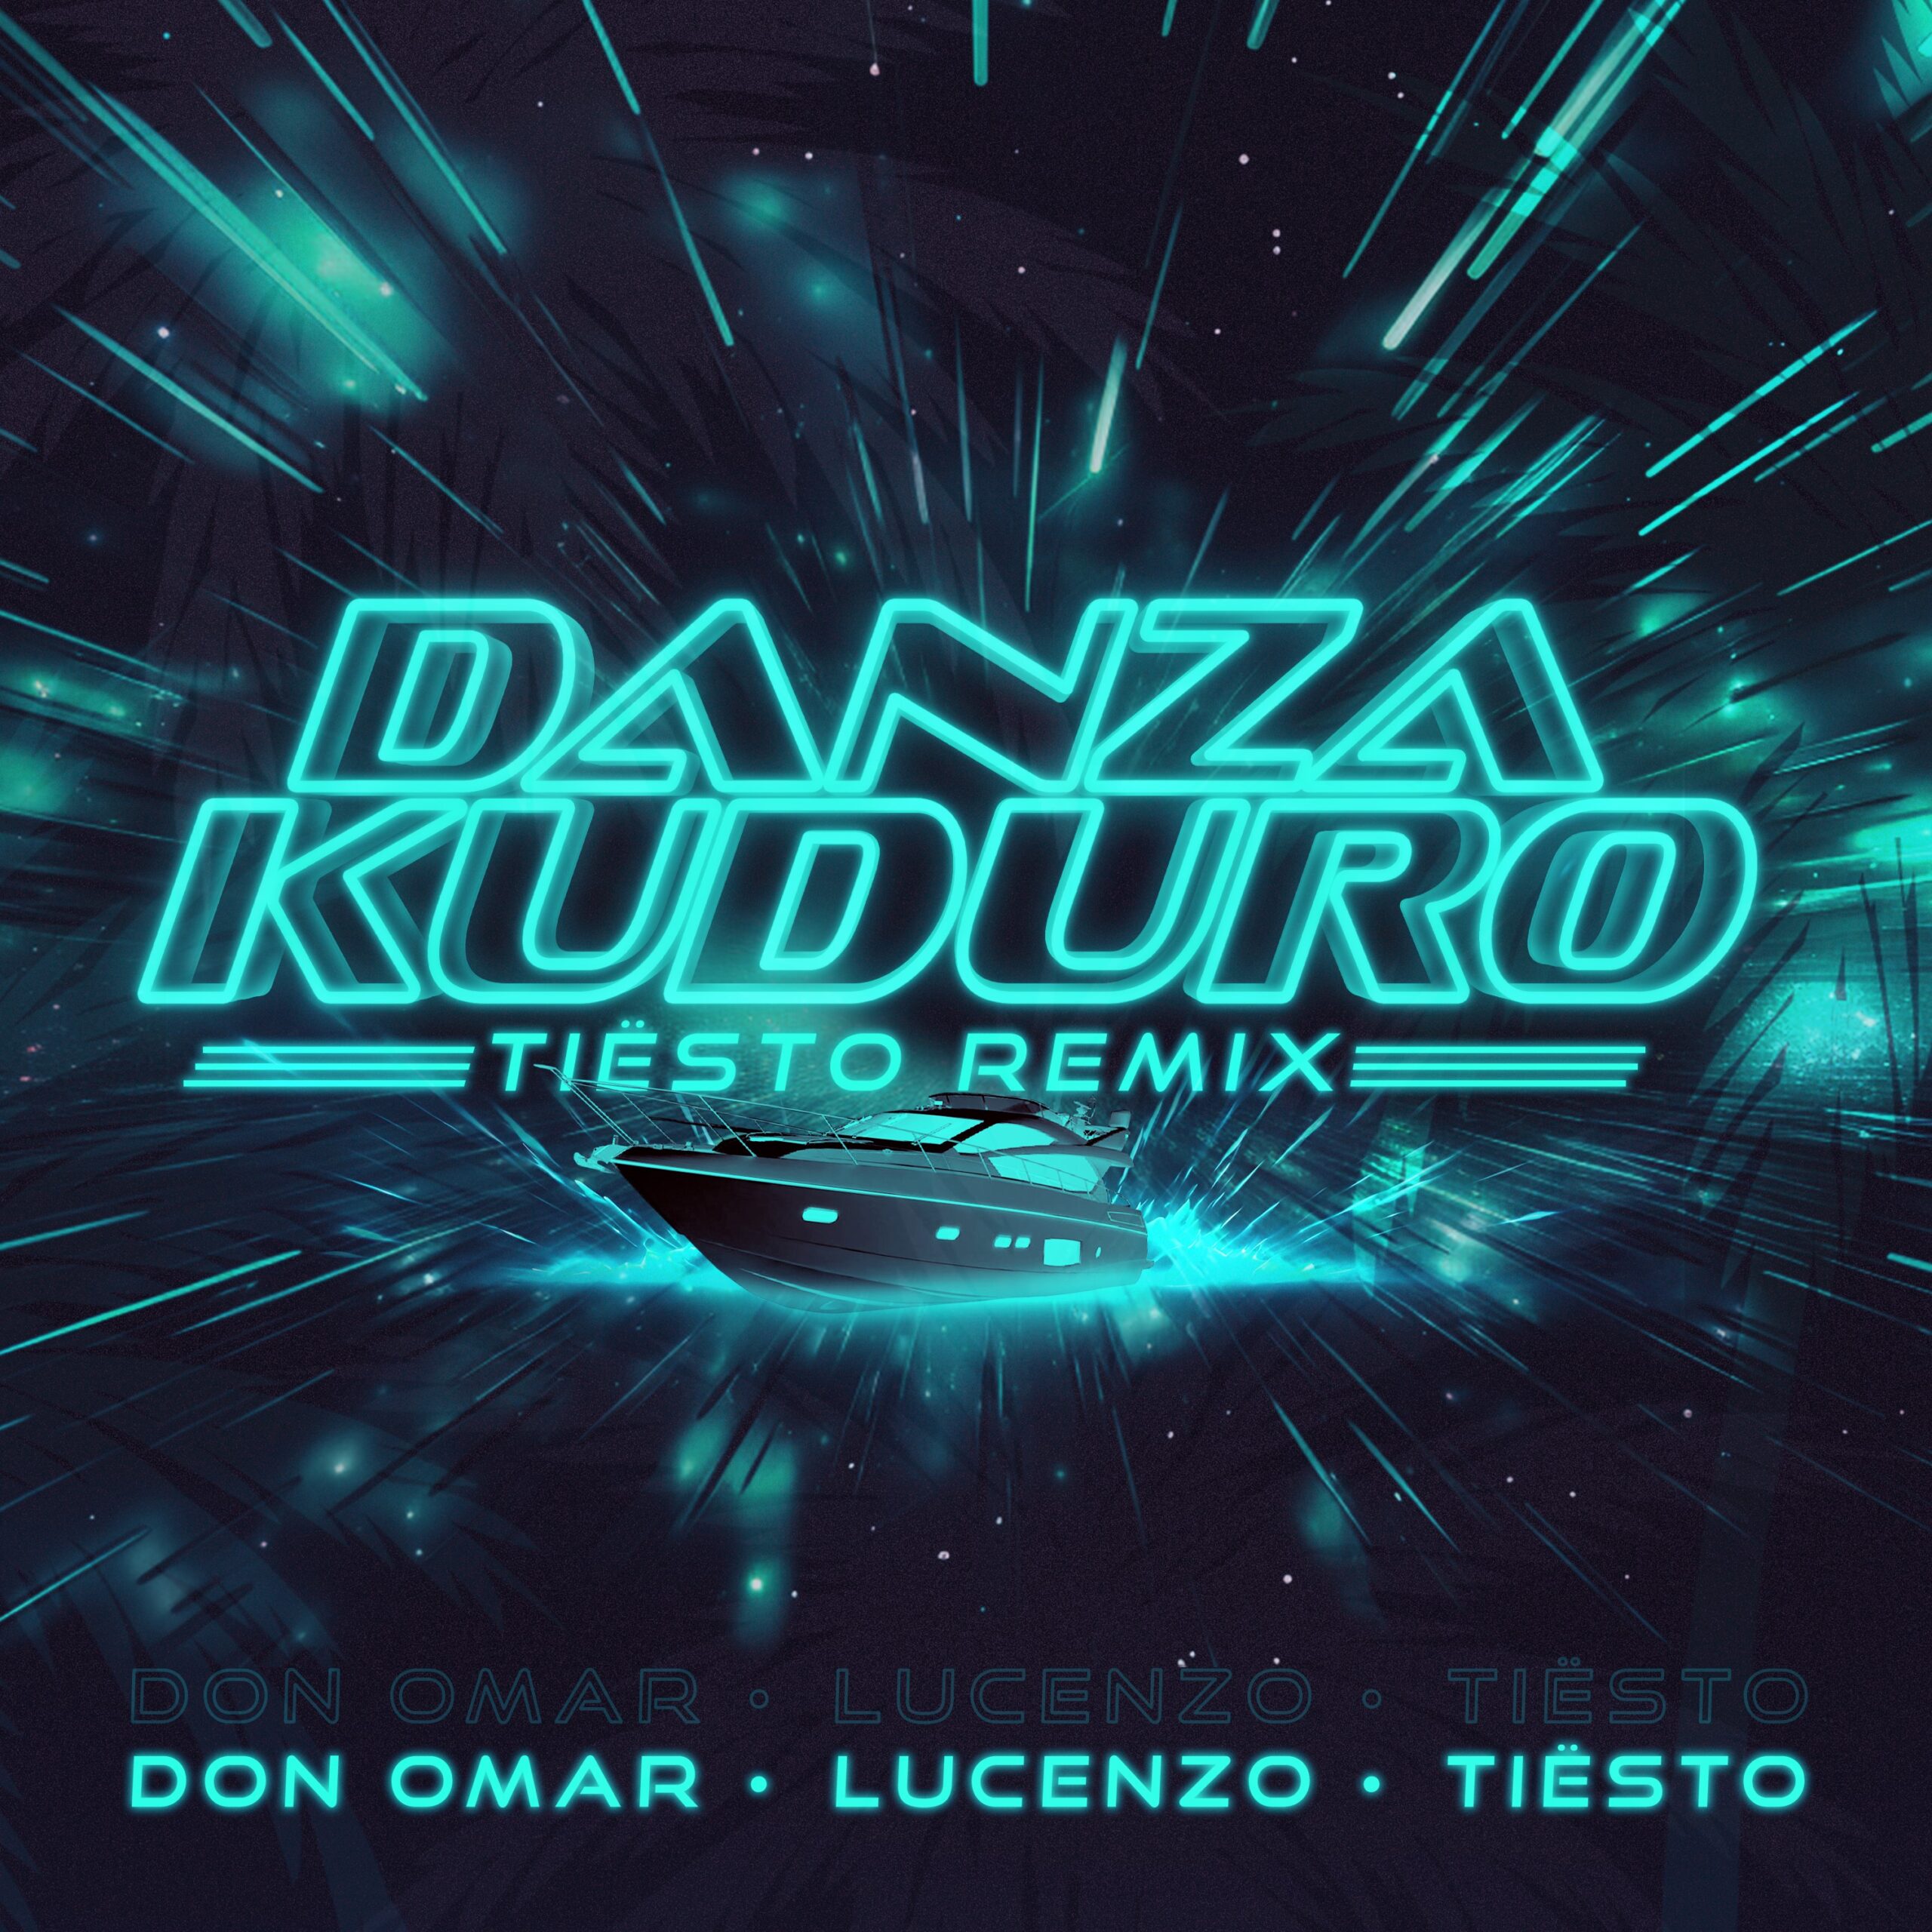 Tiësto continues Latin music love affair with new remix of Don Omar’s ‘Danza Kuduro’